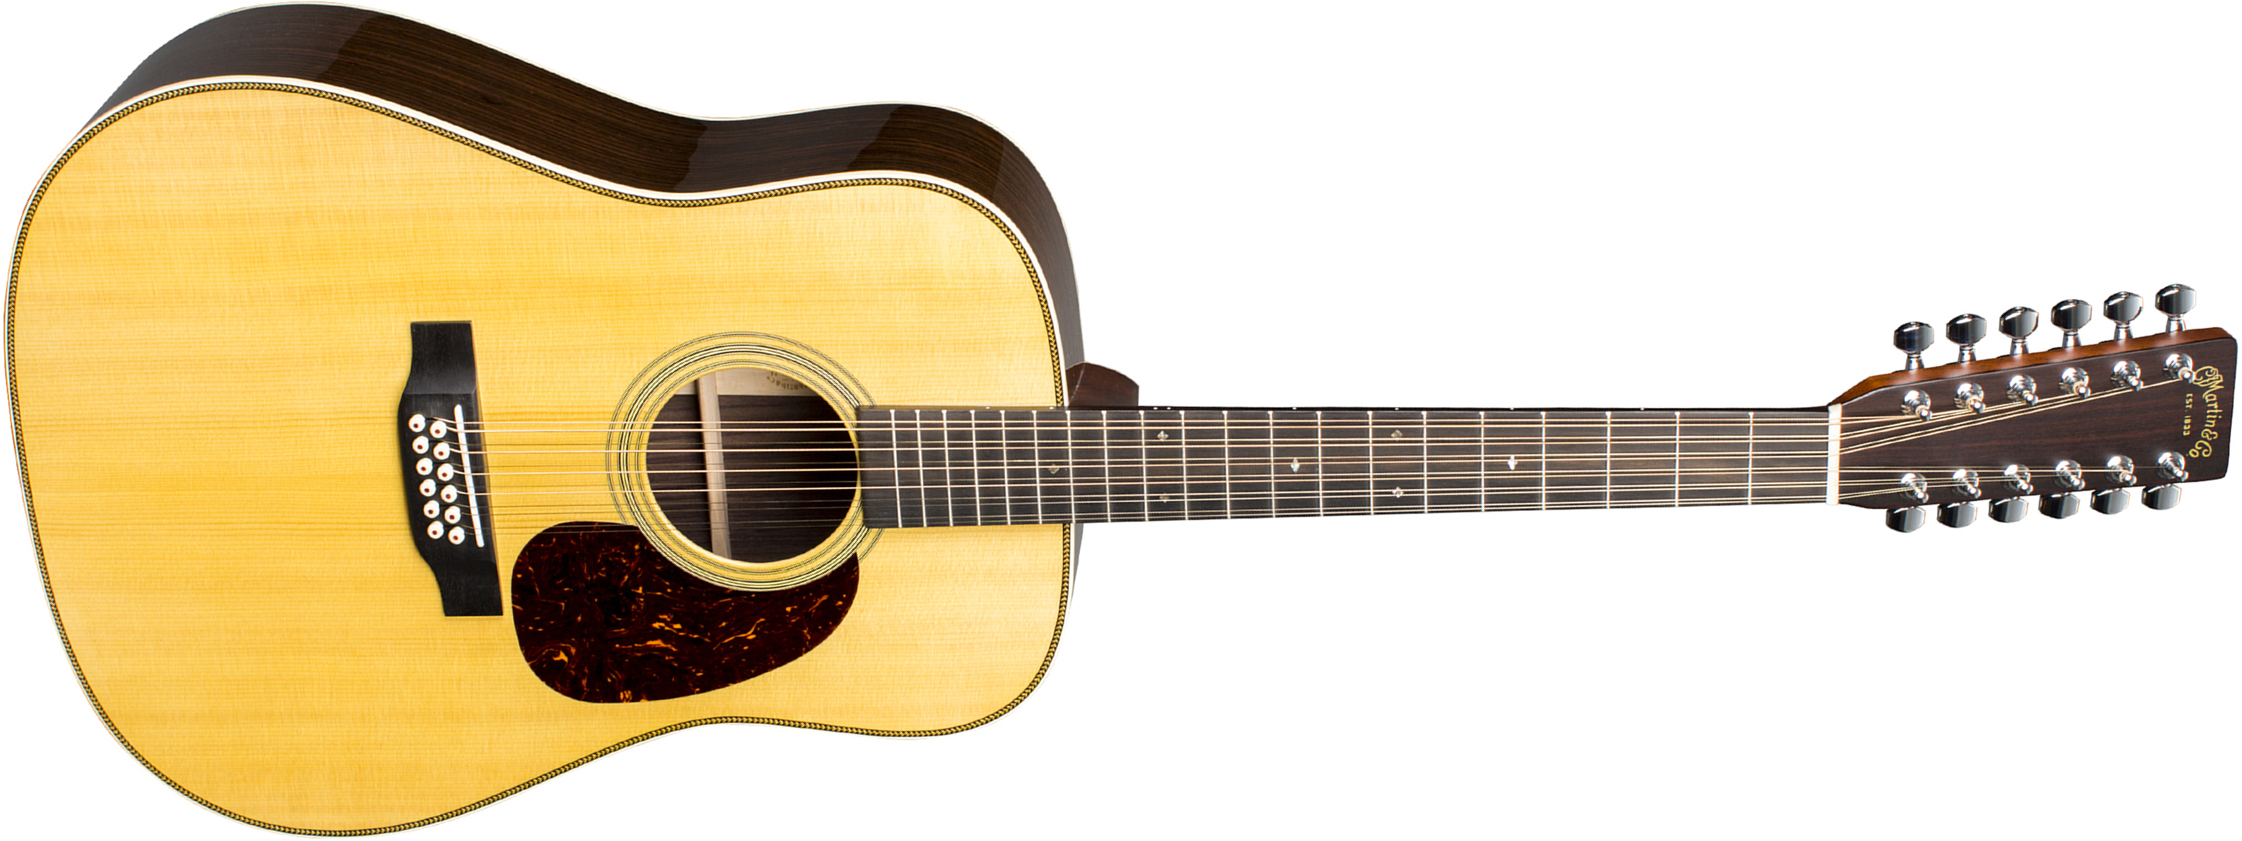 Martin Hd12-28 Standard Re-imagined Dreadnought 12c Epicea Palissandre Eb - Natural Aging Toner - Acoustic guitar & electro - Main picture